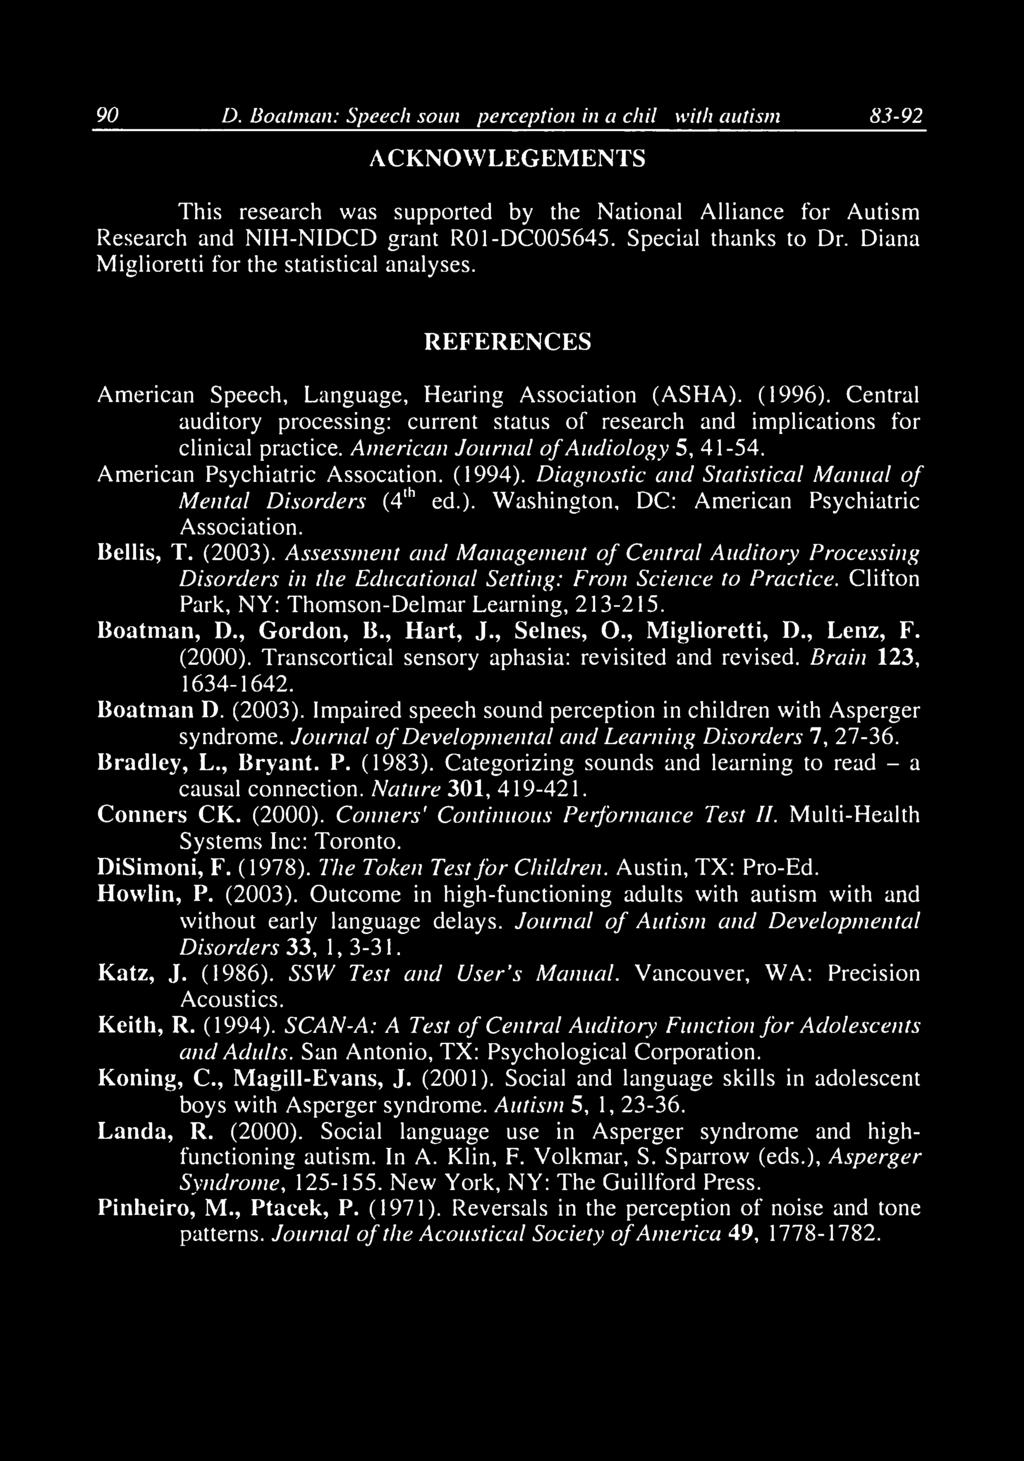 90 D. Boatman: Speech souncl perception in a chilcl with autism 83-92 ACKNOWLEGEMENTS This research was supported by the National Alliance for Autism Research and NIH-NIDCD grant R01-DC005645.